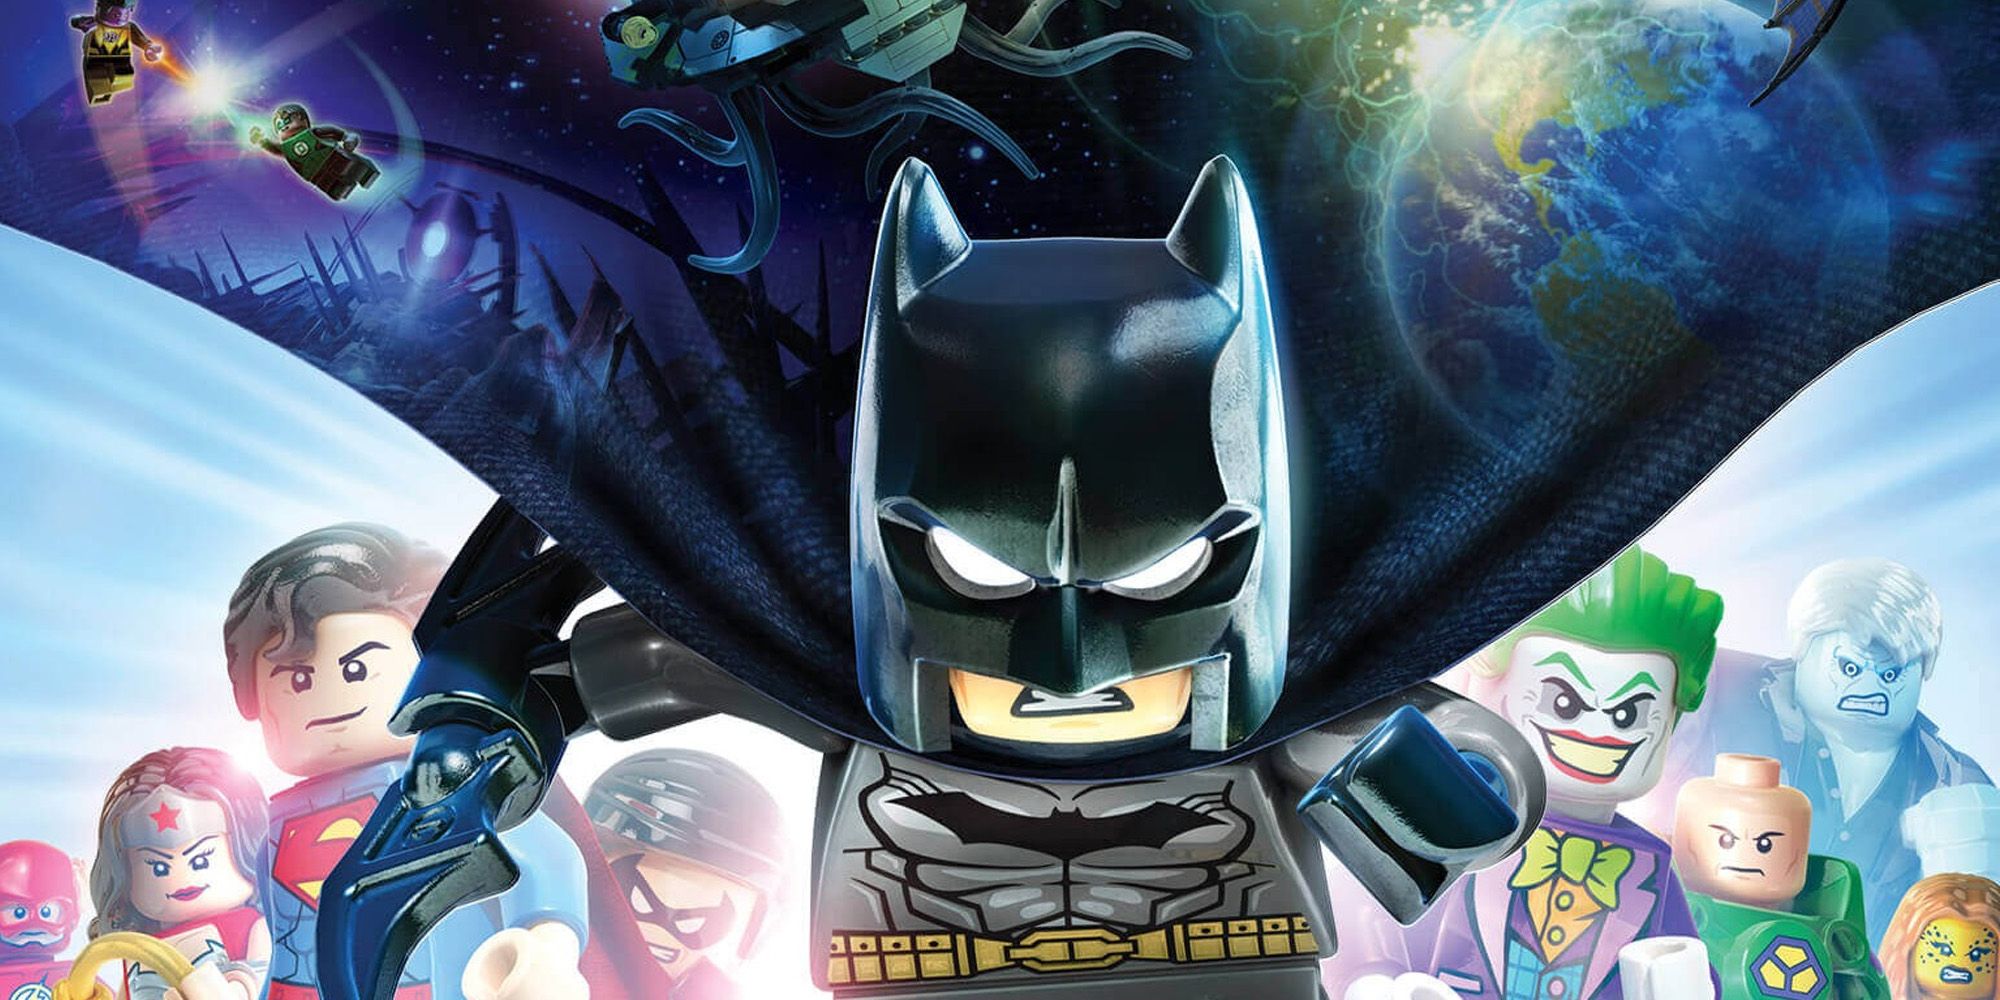 Cover art for LEGO Batman 3: Beyond Gotham, showing Batman in the centre with a flowing cape showcasing the game's different worlds. To his left are several DC heroes, including Flash, Wonder Woman, Superman, and Robin. To his right stand several supervillains, starting with the Joker, then Lex Luthor, Solomon Grundy, and Cheetah.